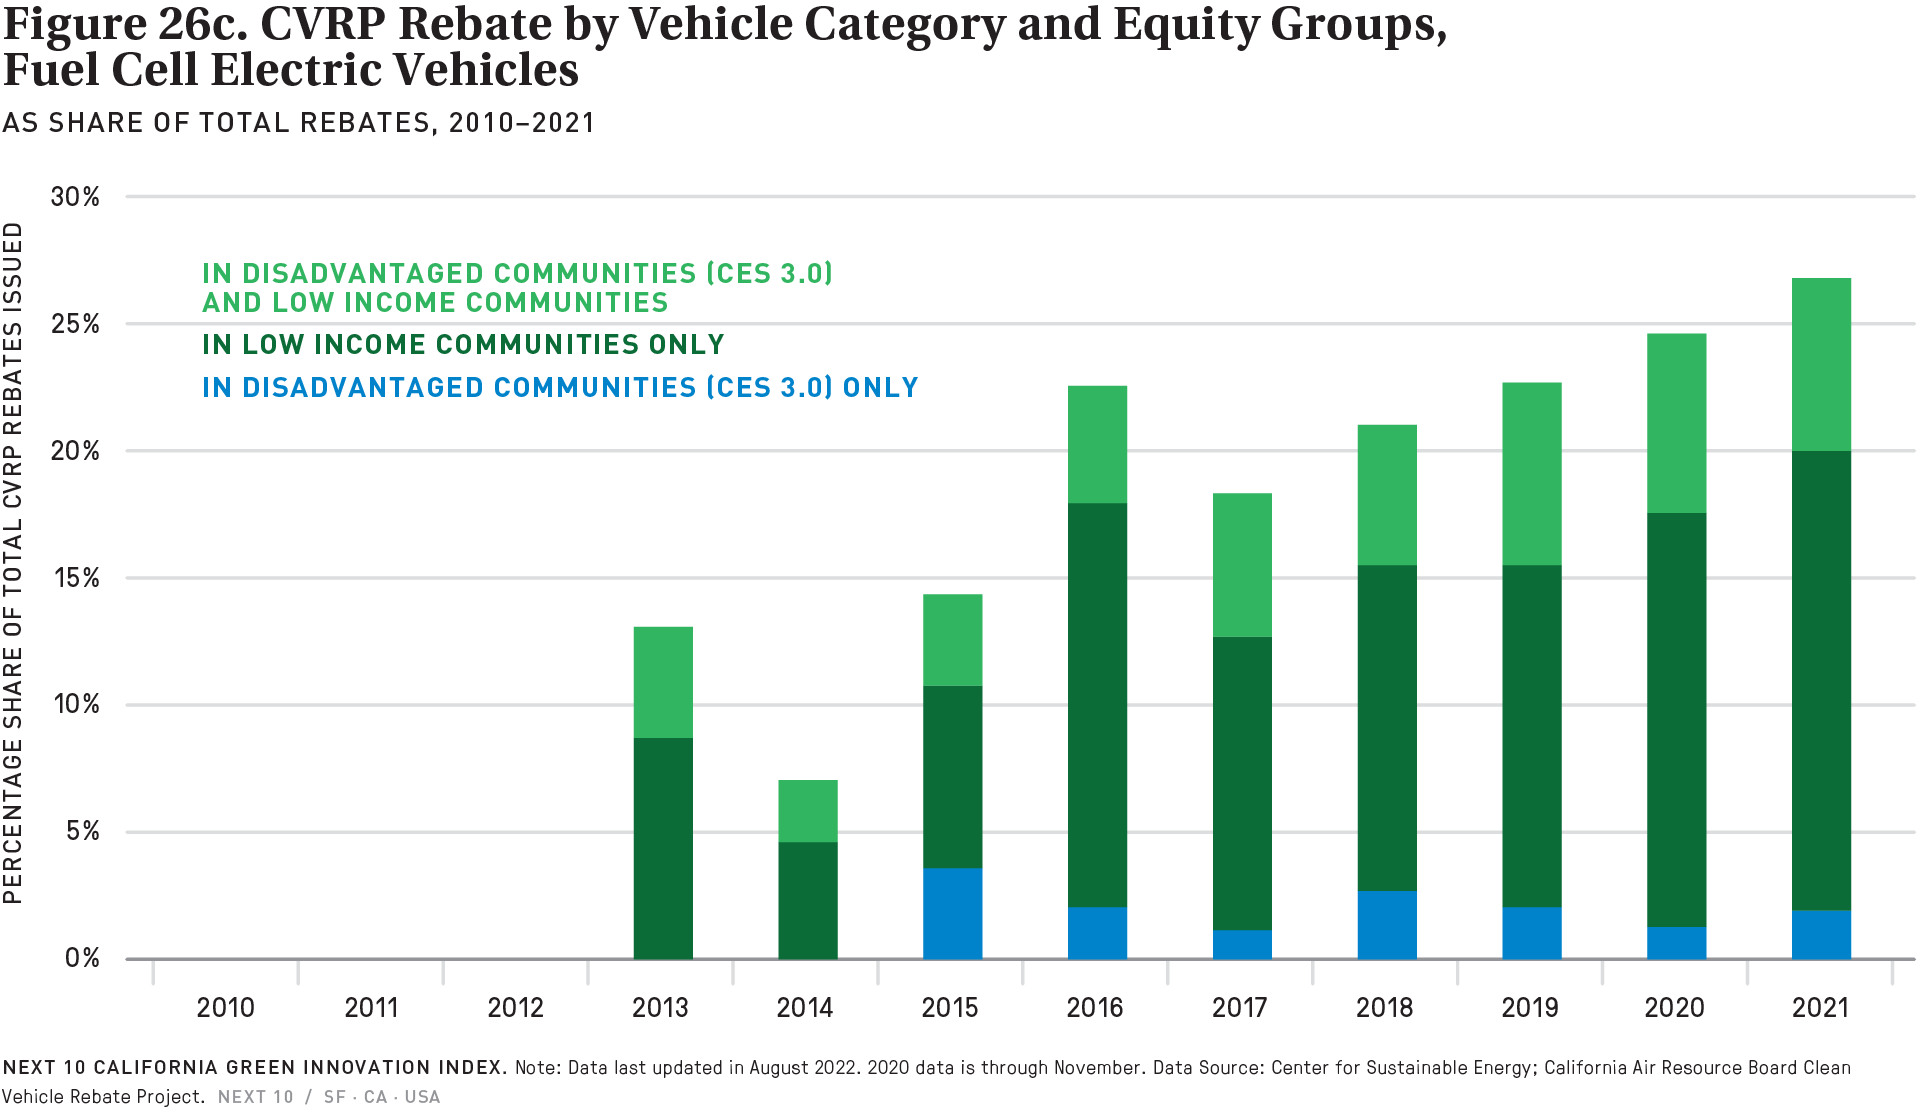 Figure 26a d CVRP Rebate By Vehicle Category And Equity Groups As 